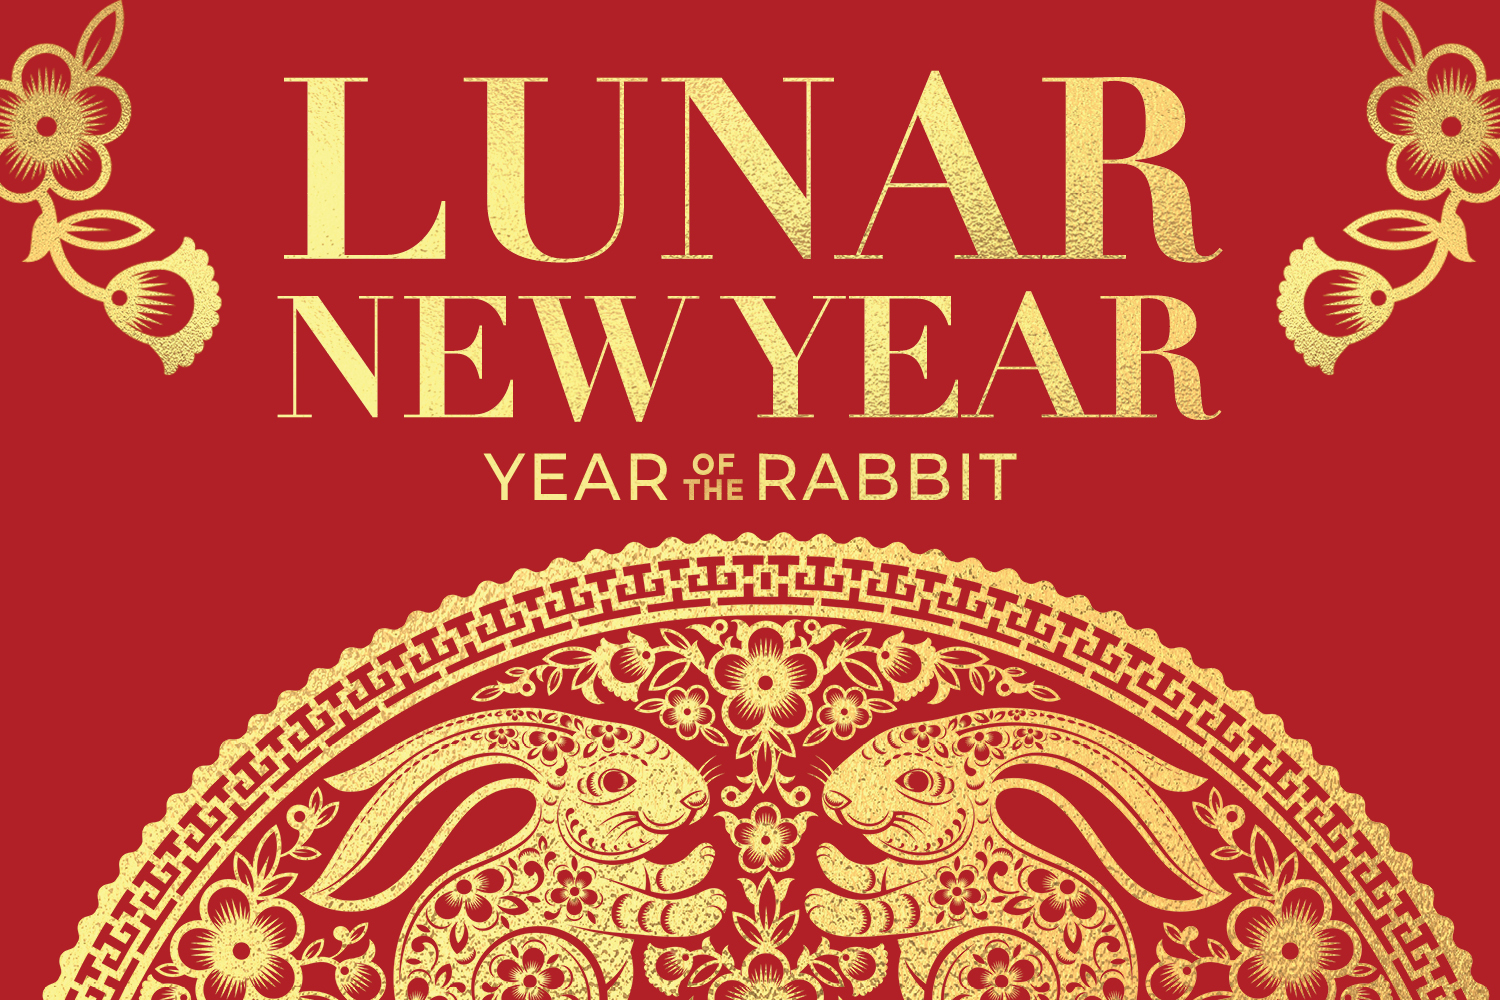 Celebrate Lunar New Year at Fashion Island In Style